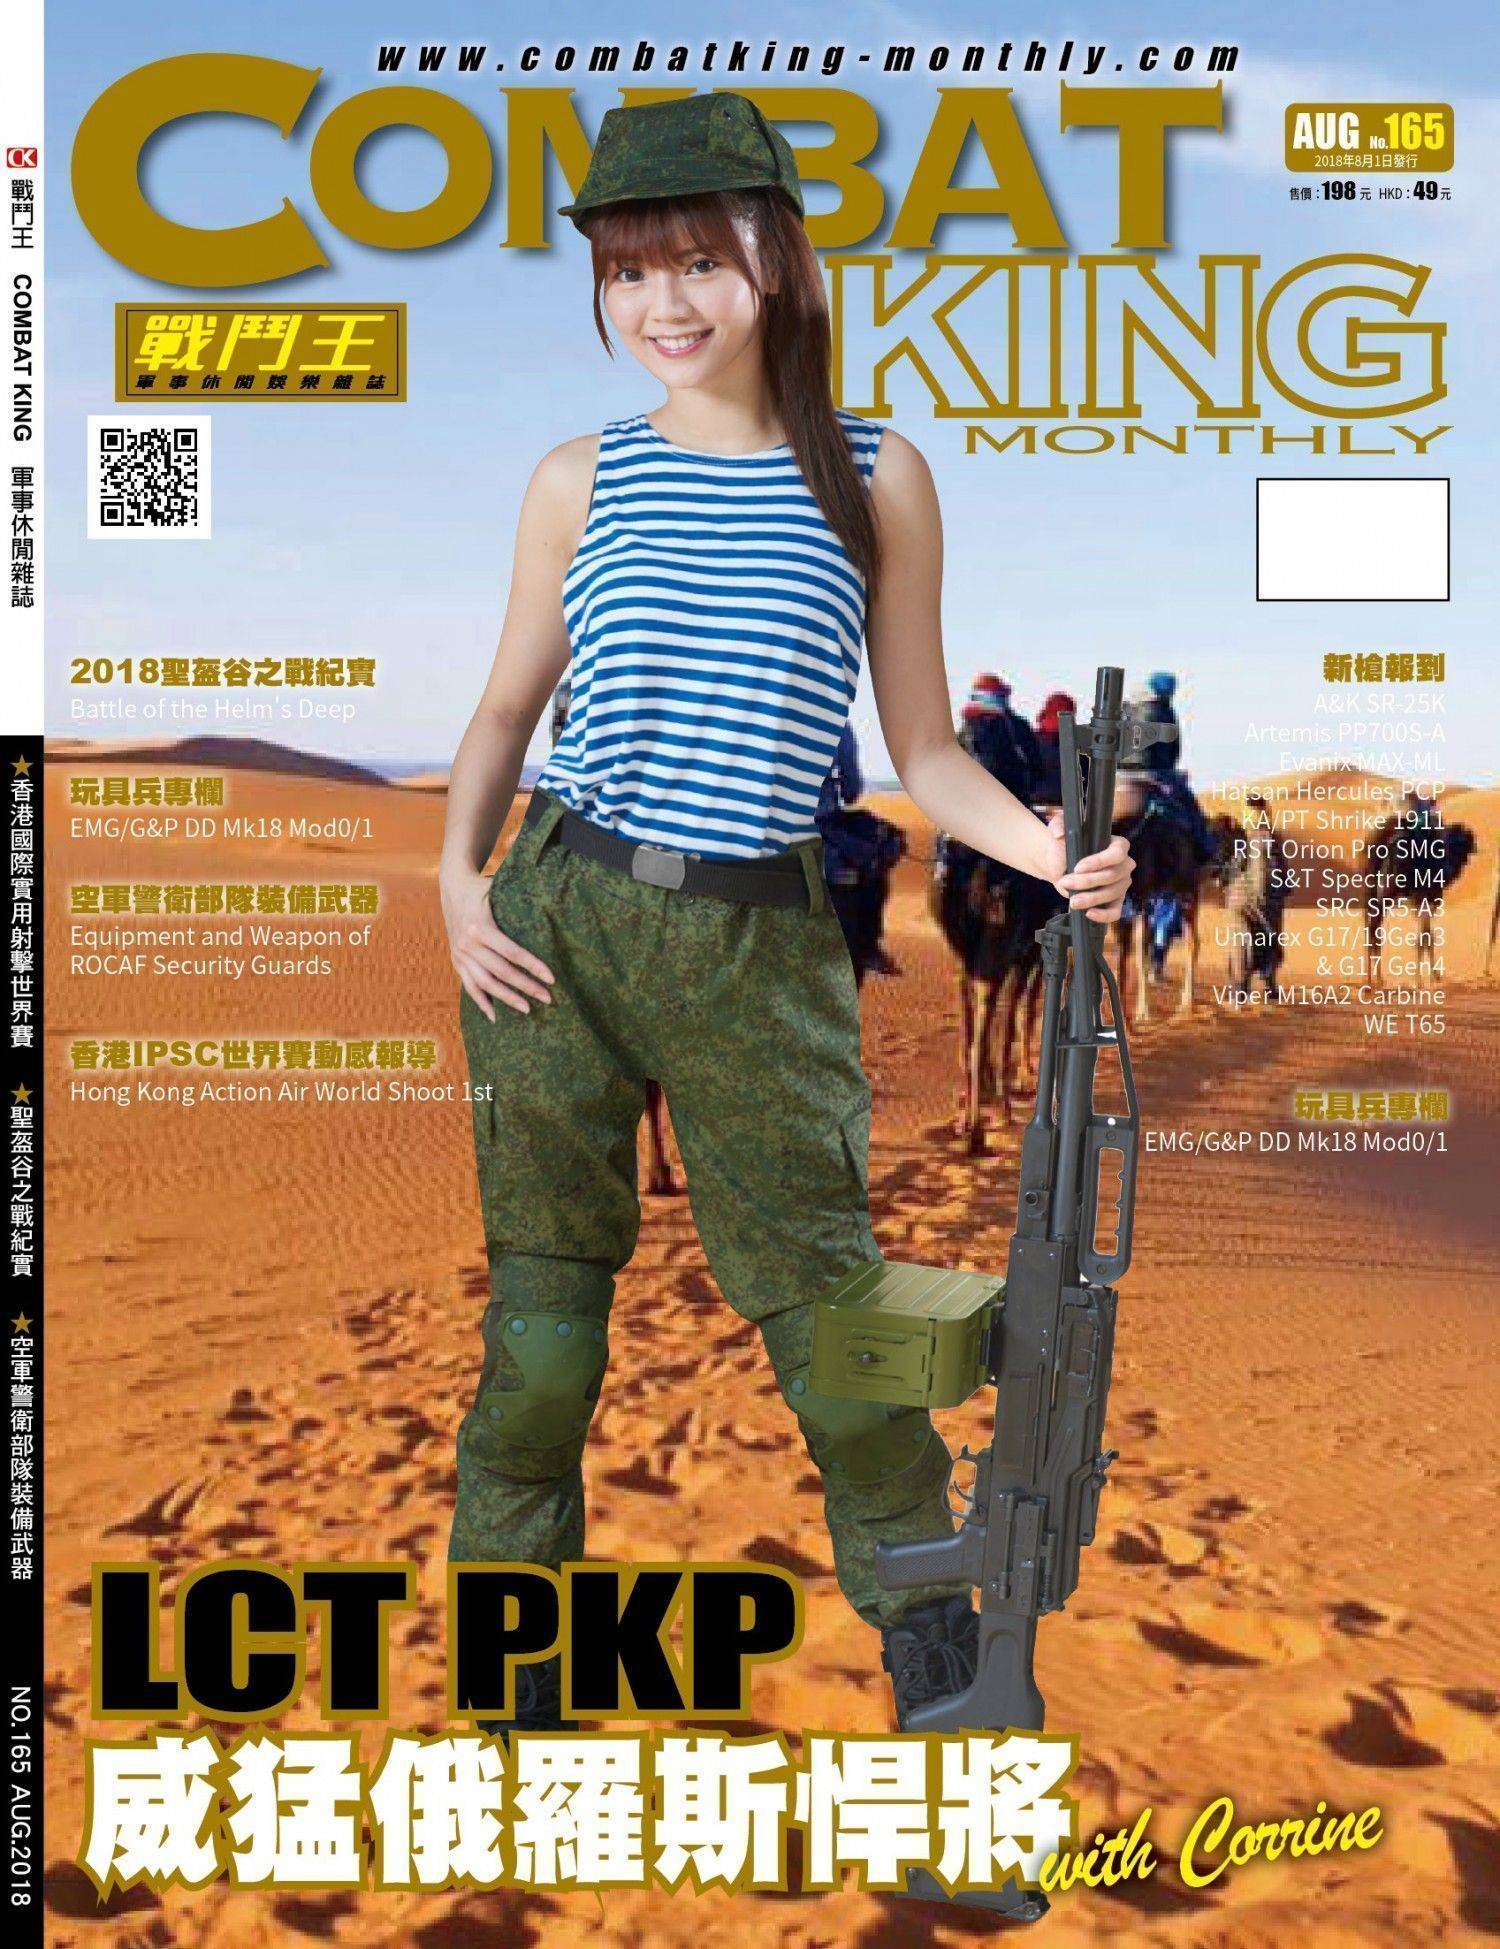 Combat King Monthly Issue165 Aug. 2018